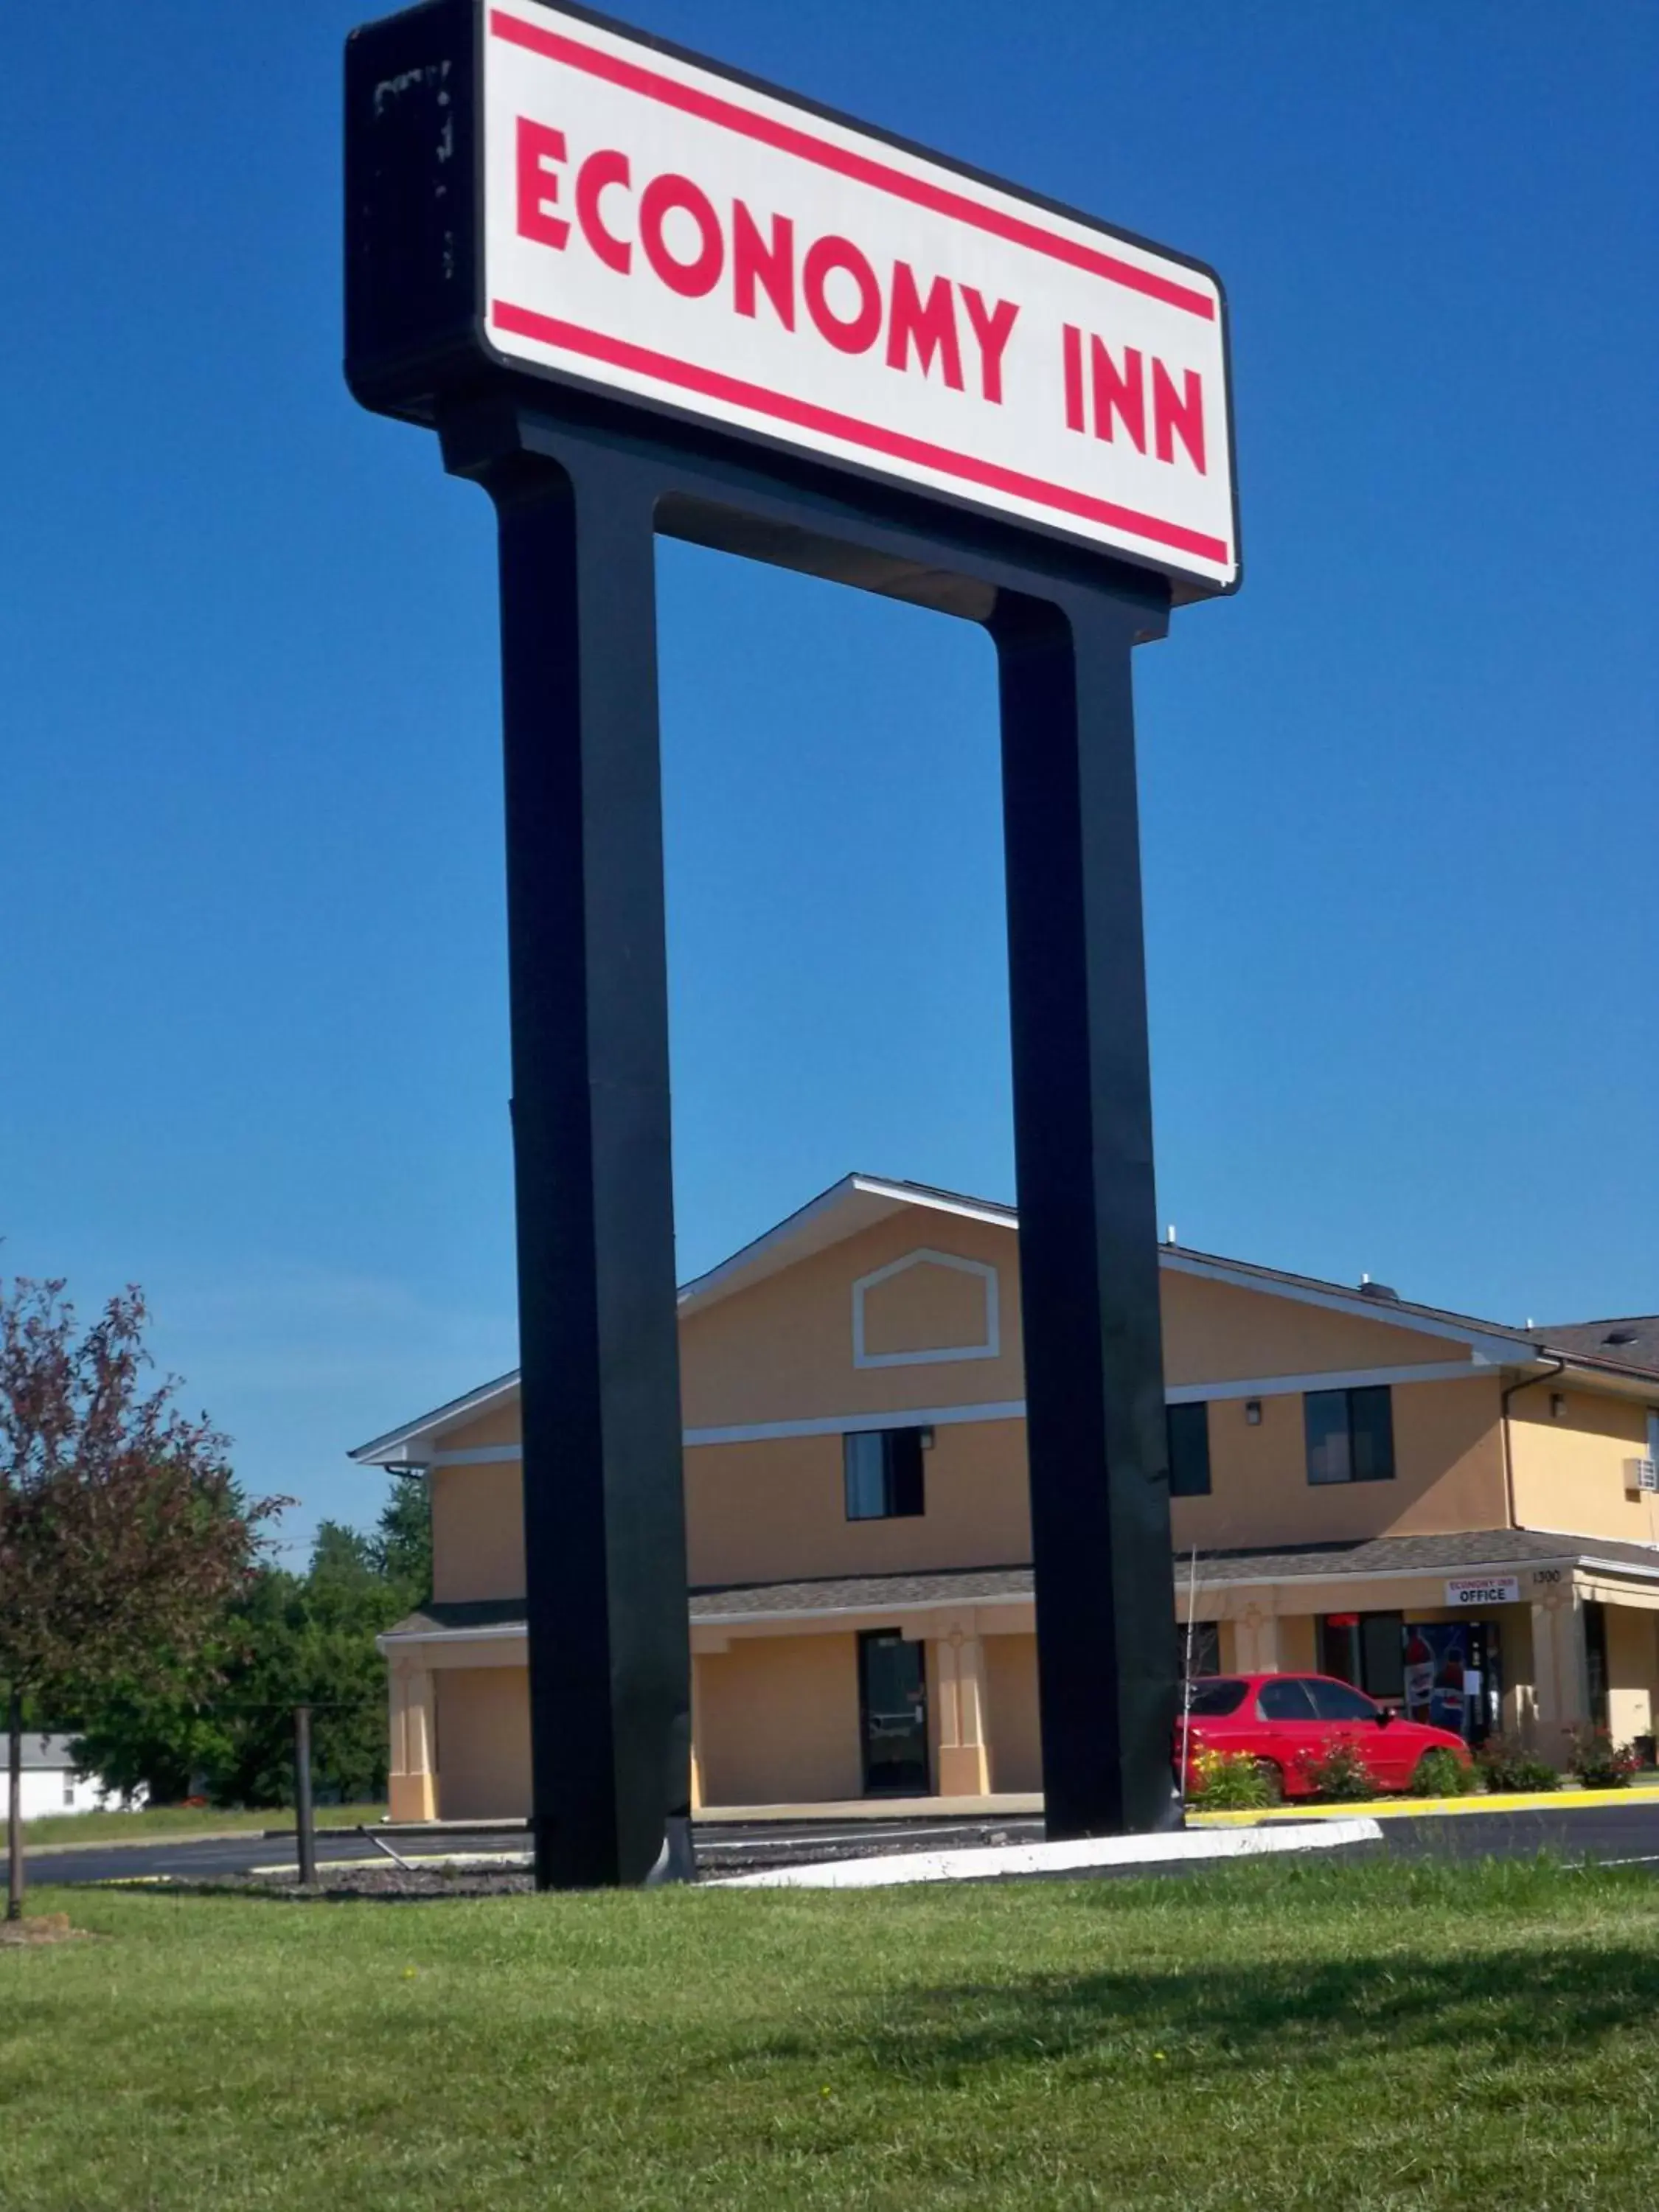 Property logo or sign, Property Building in Economy Inn Wentzville